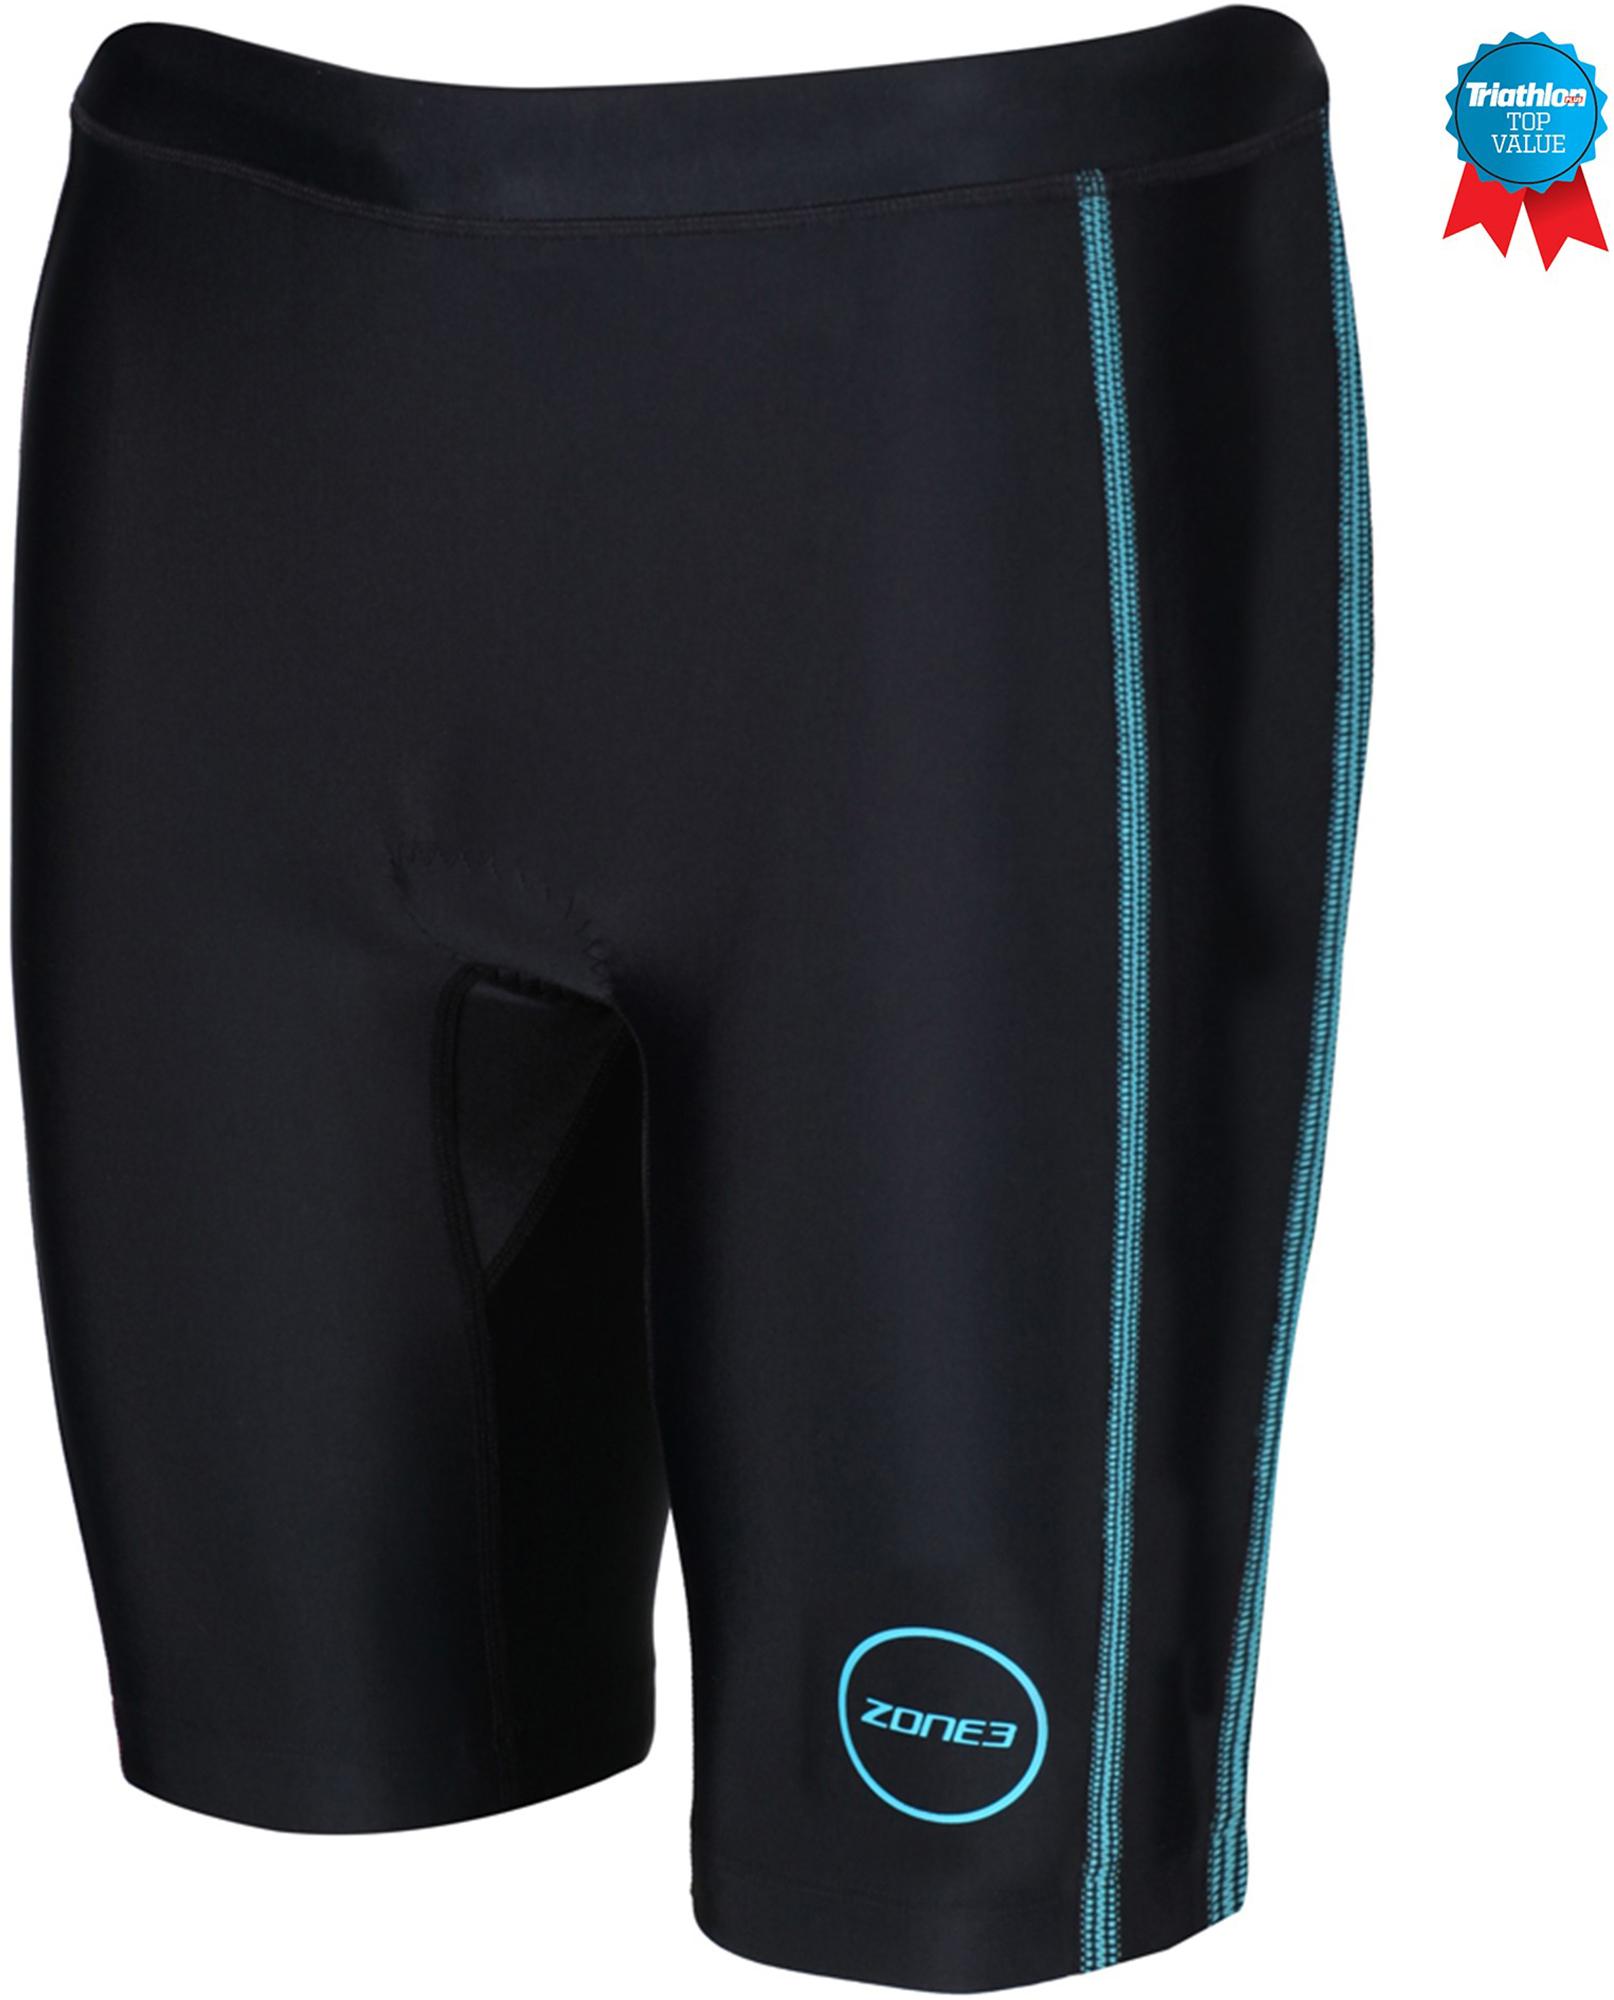 Zone3  Womens Activate Tri Shorts - Black/turquoise